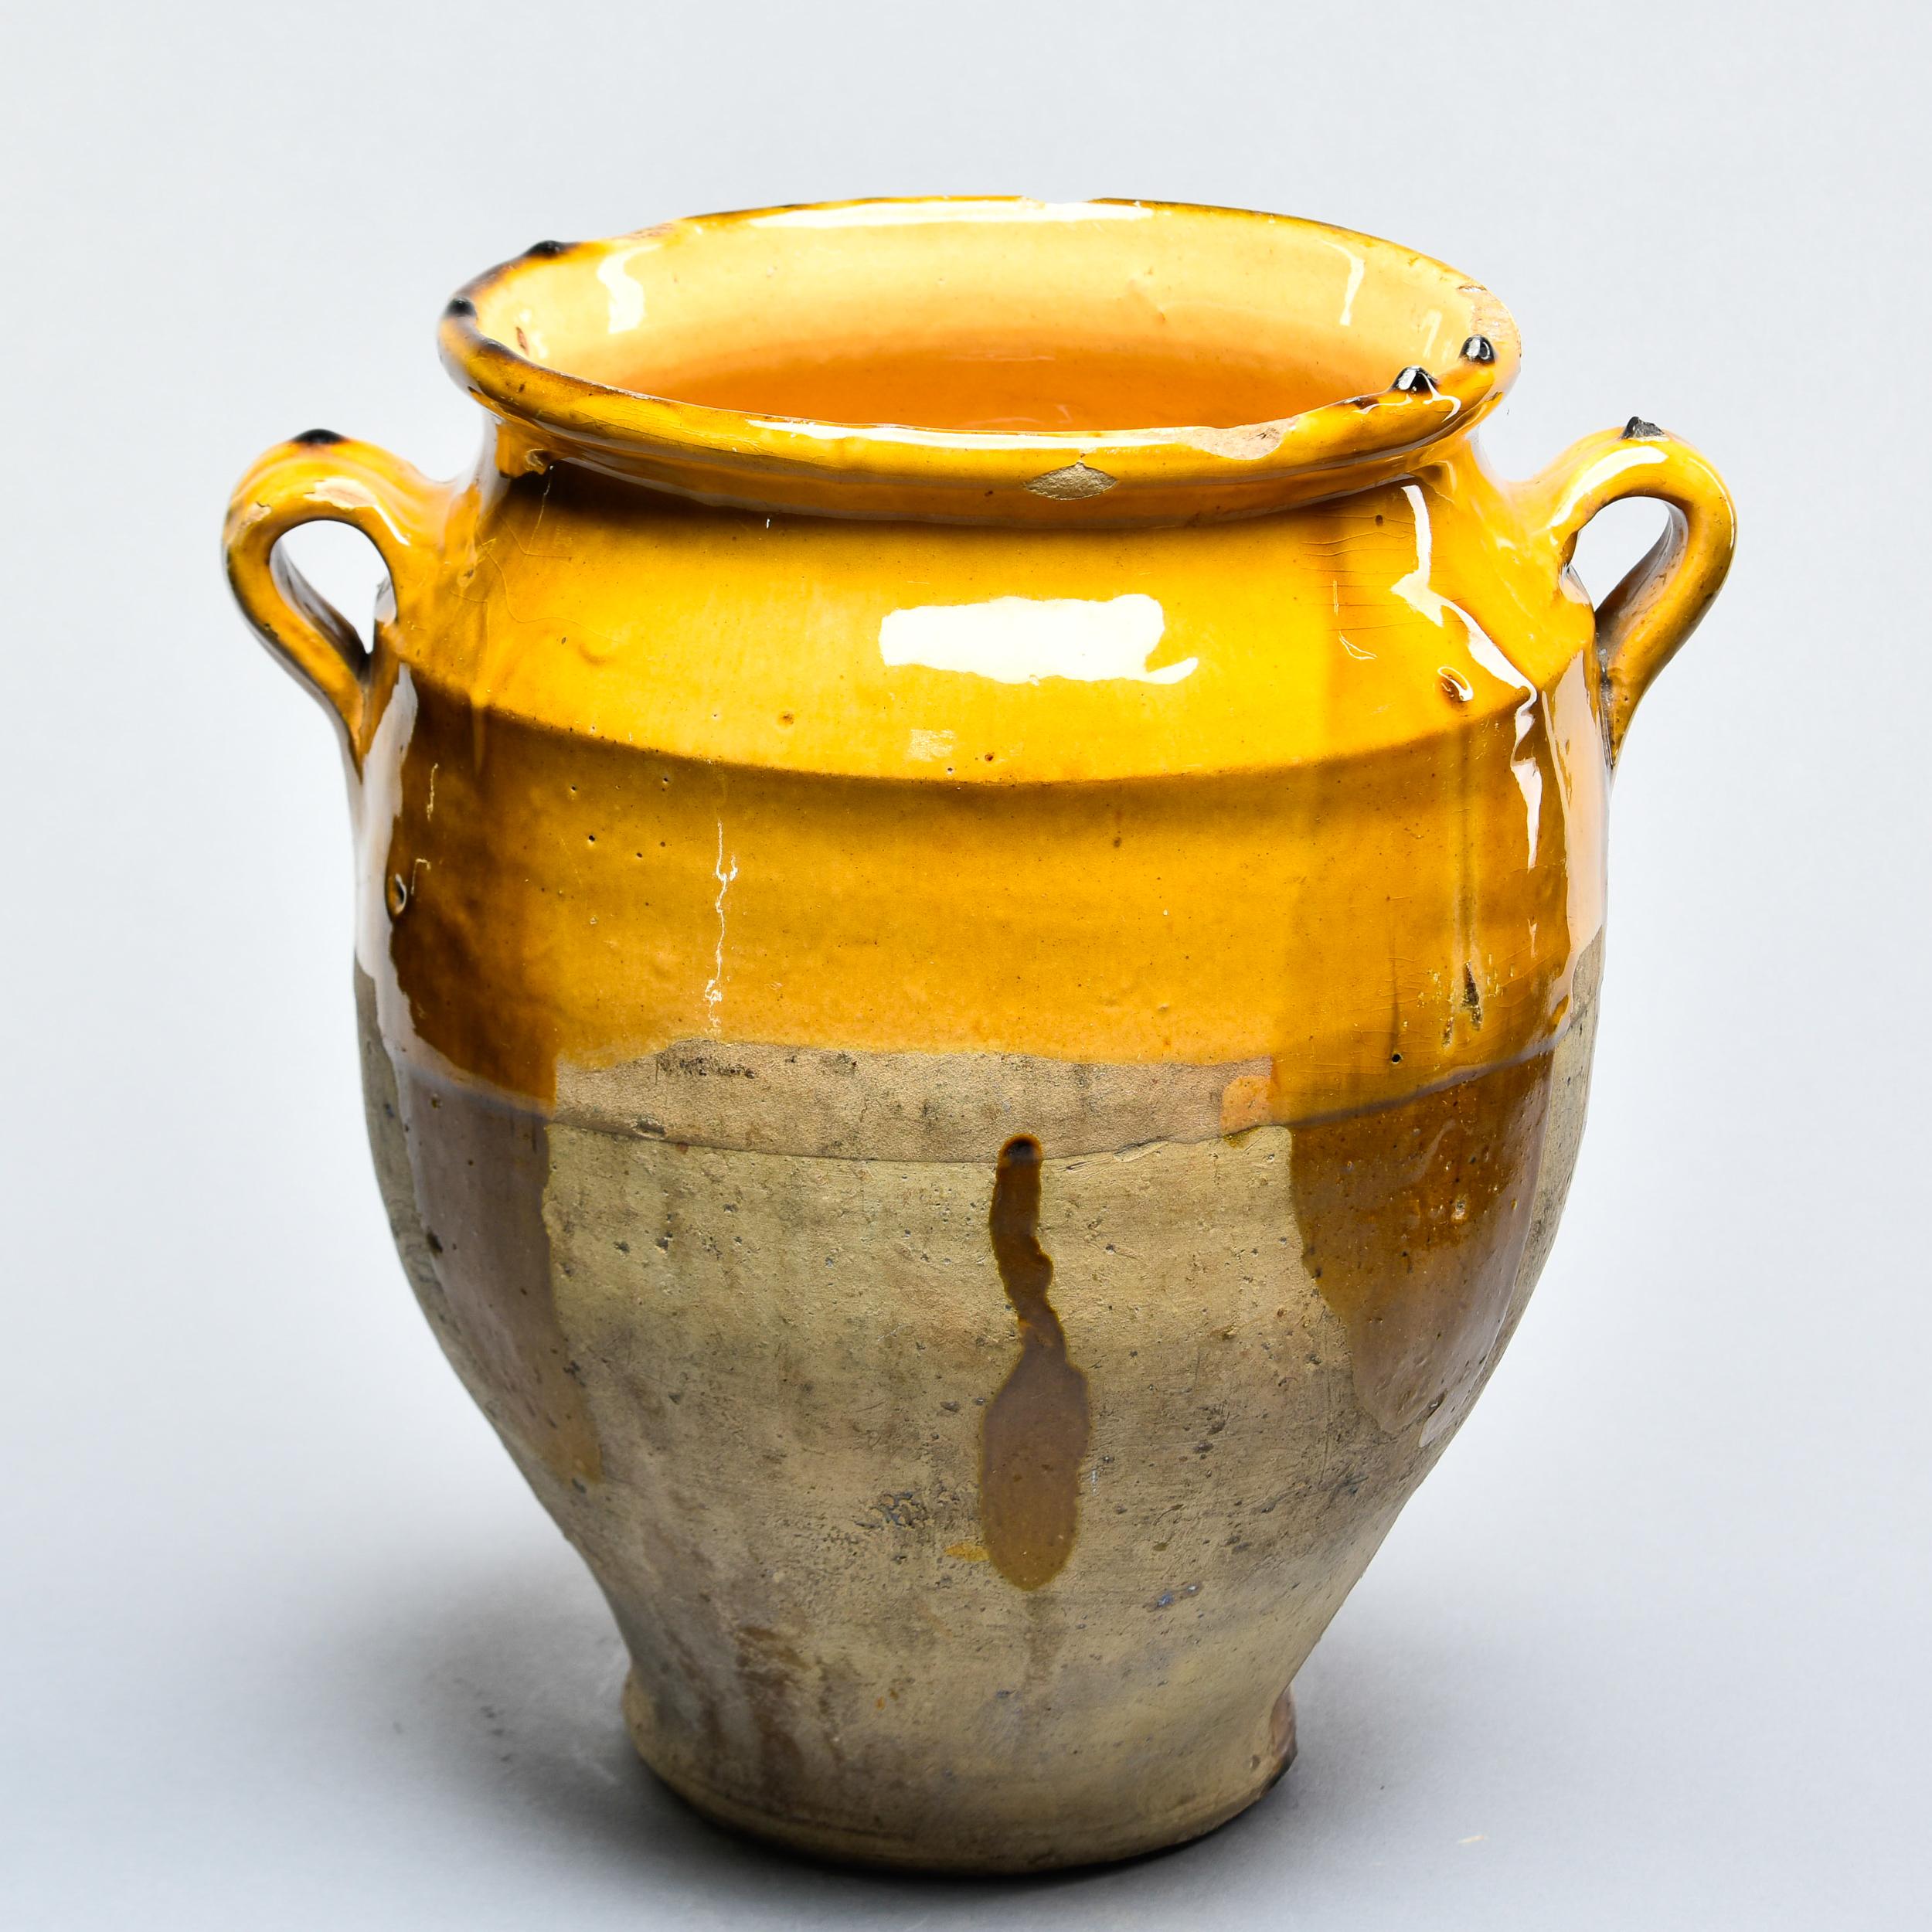 Found in France, this French confit jar dates from approximately 1910. This piece stands 12” high and has the traditional form with a wide vessel body and two handles on the sides with a mustard-colored glaze on the outside top half and fully glazed